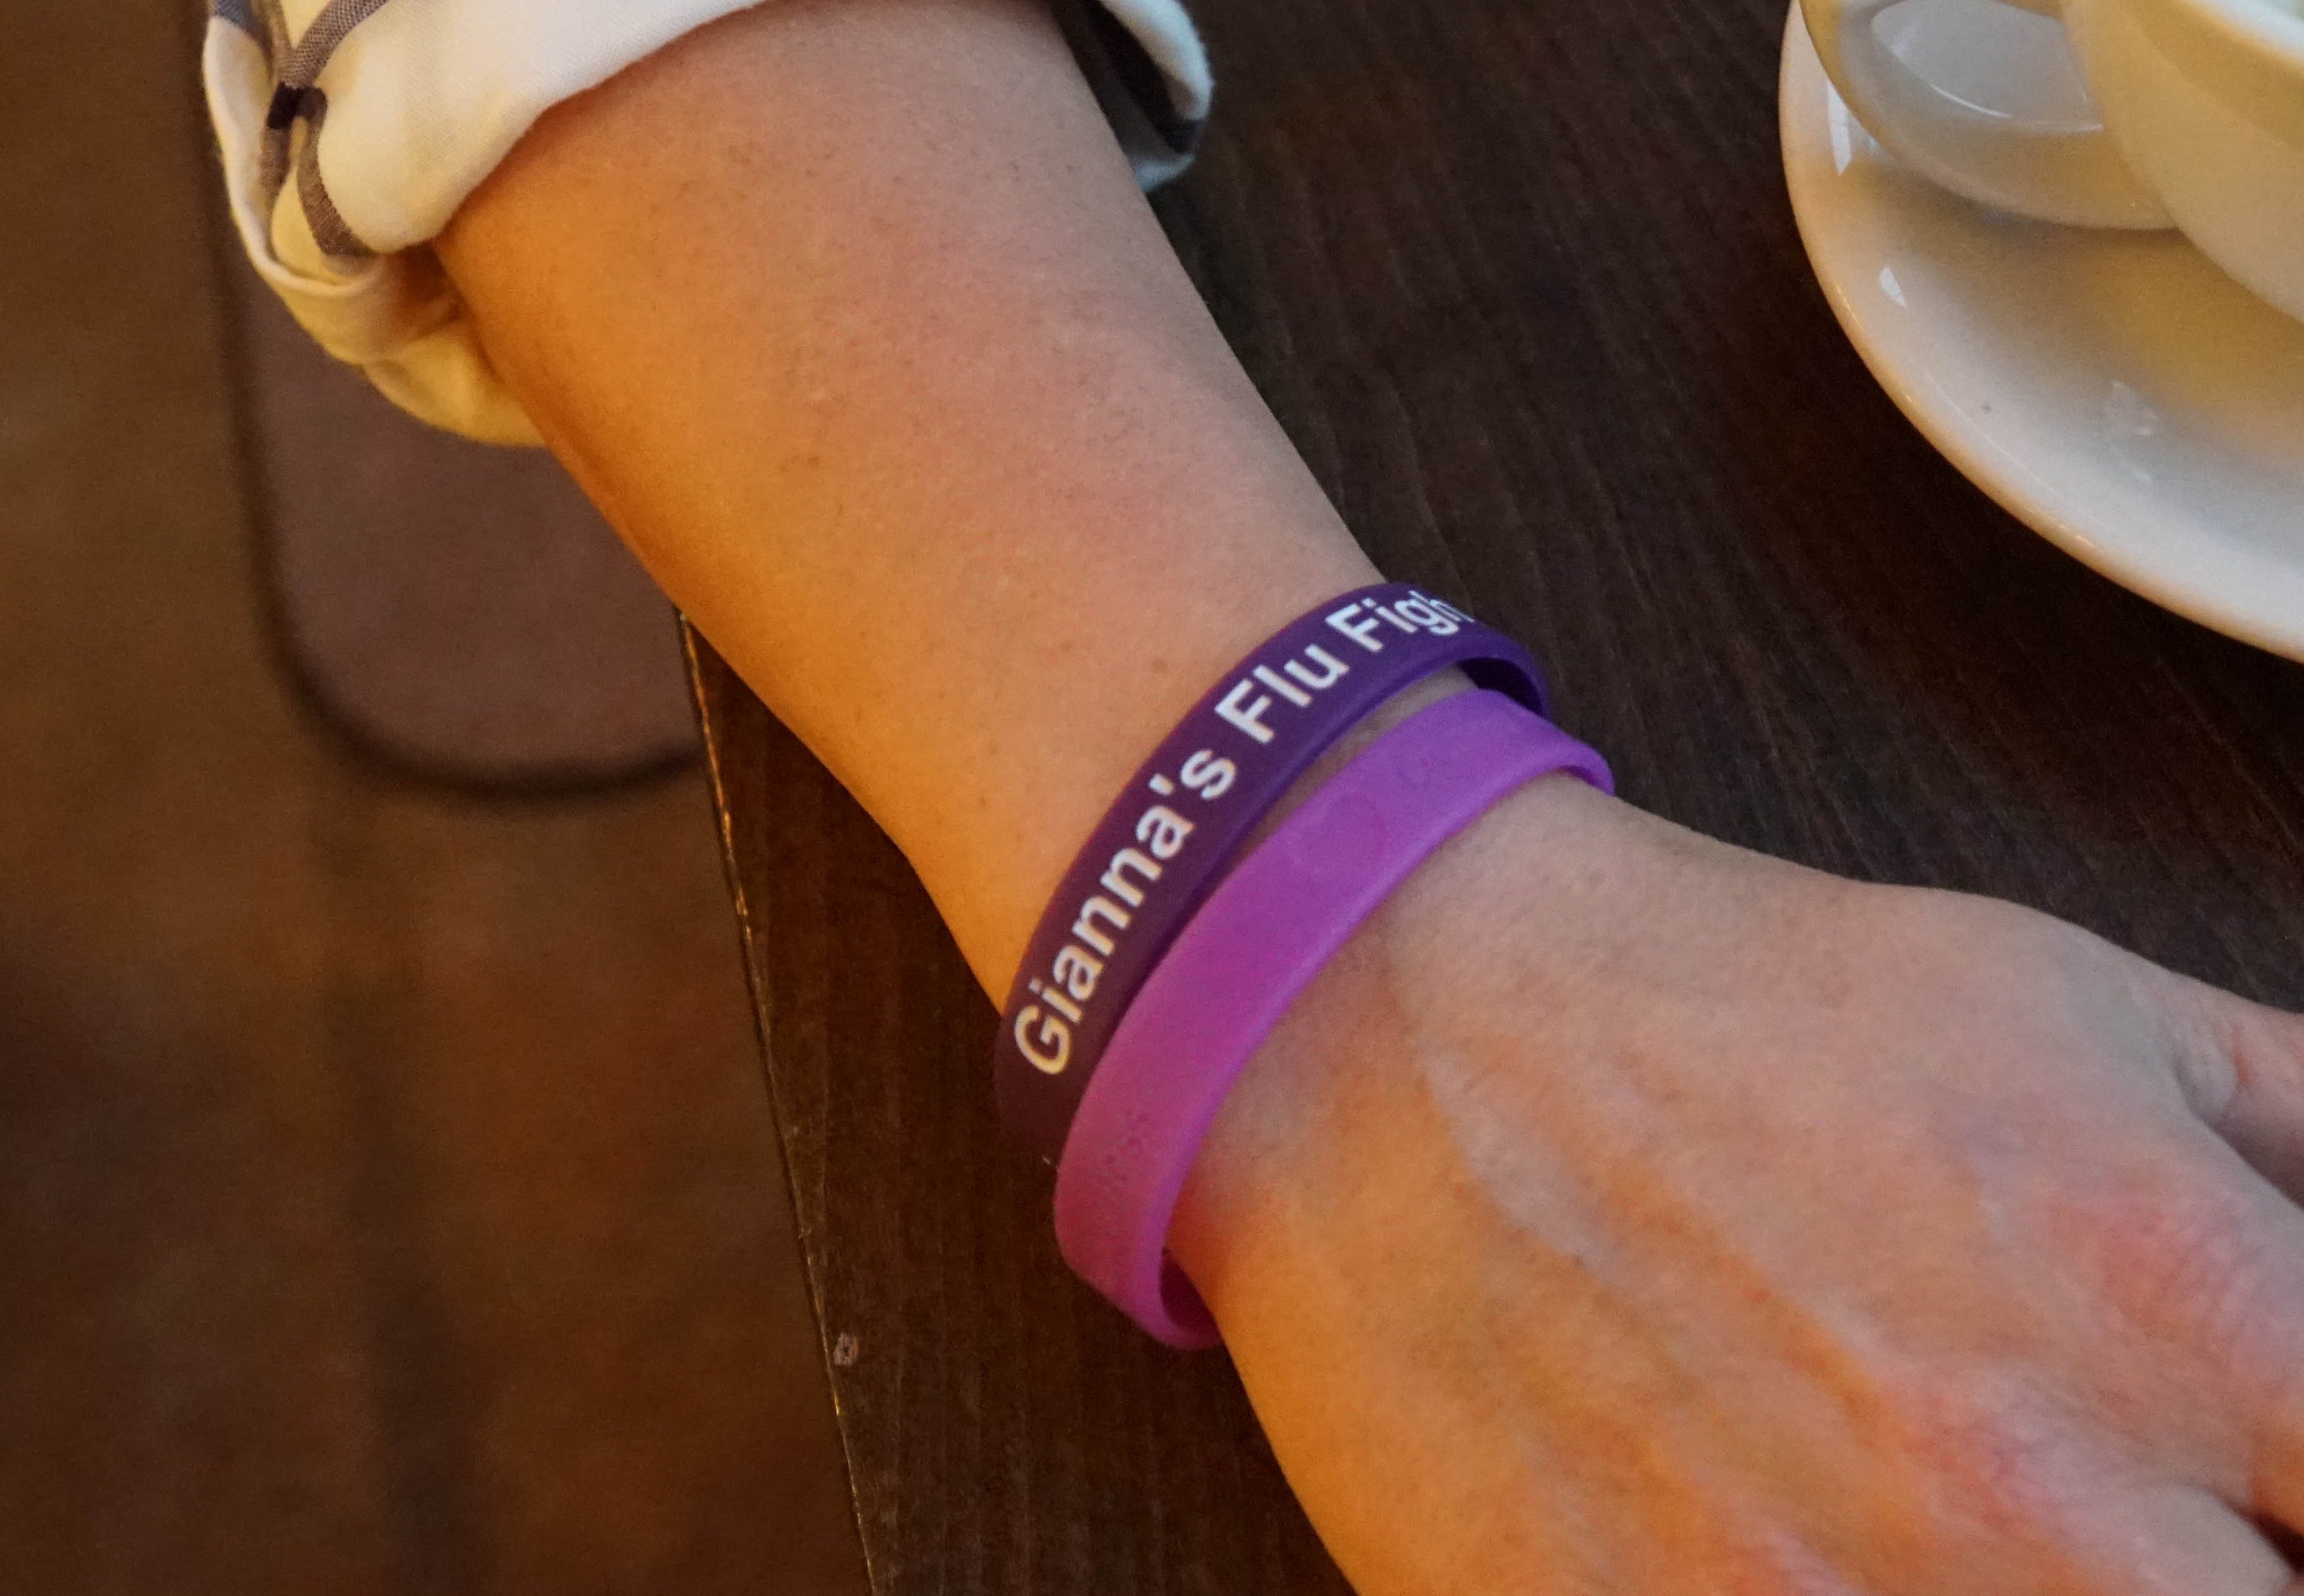 Flu shot advocate Angie Wehrkamp wears bracelets on her wrist in honor of her daughter, Gianna.